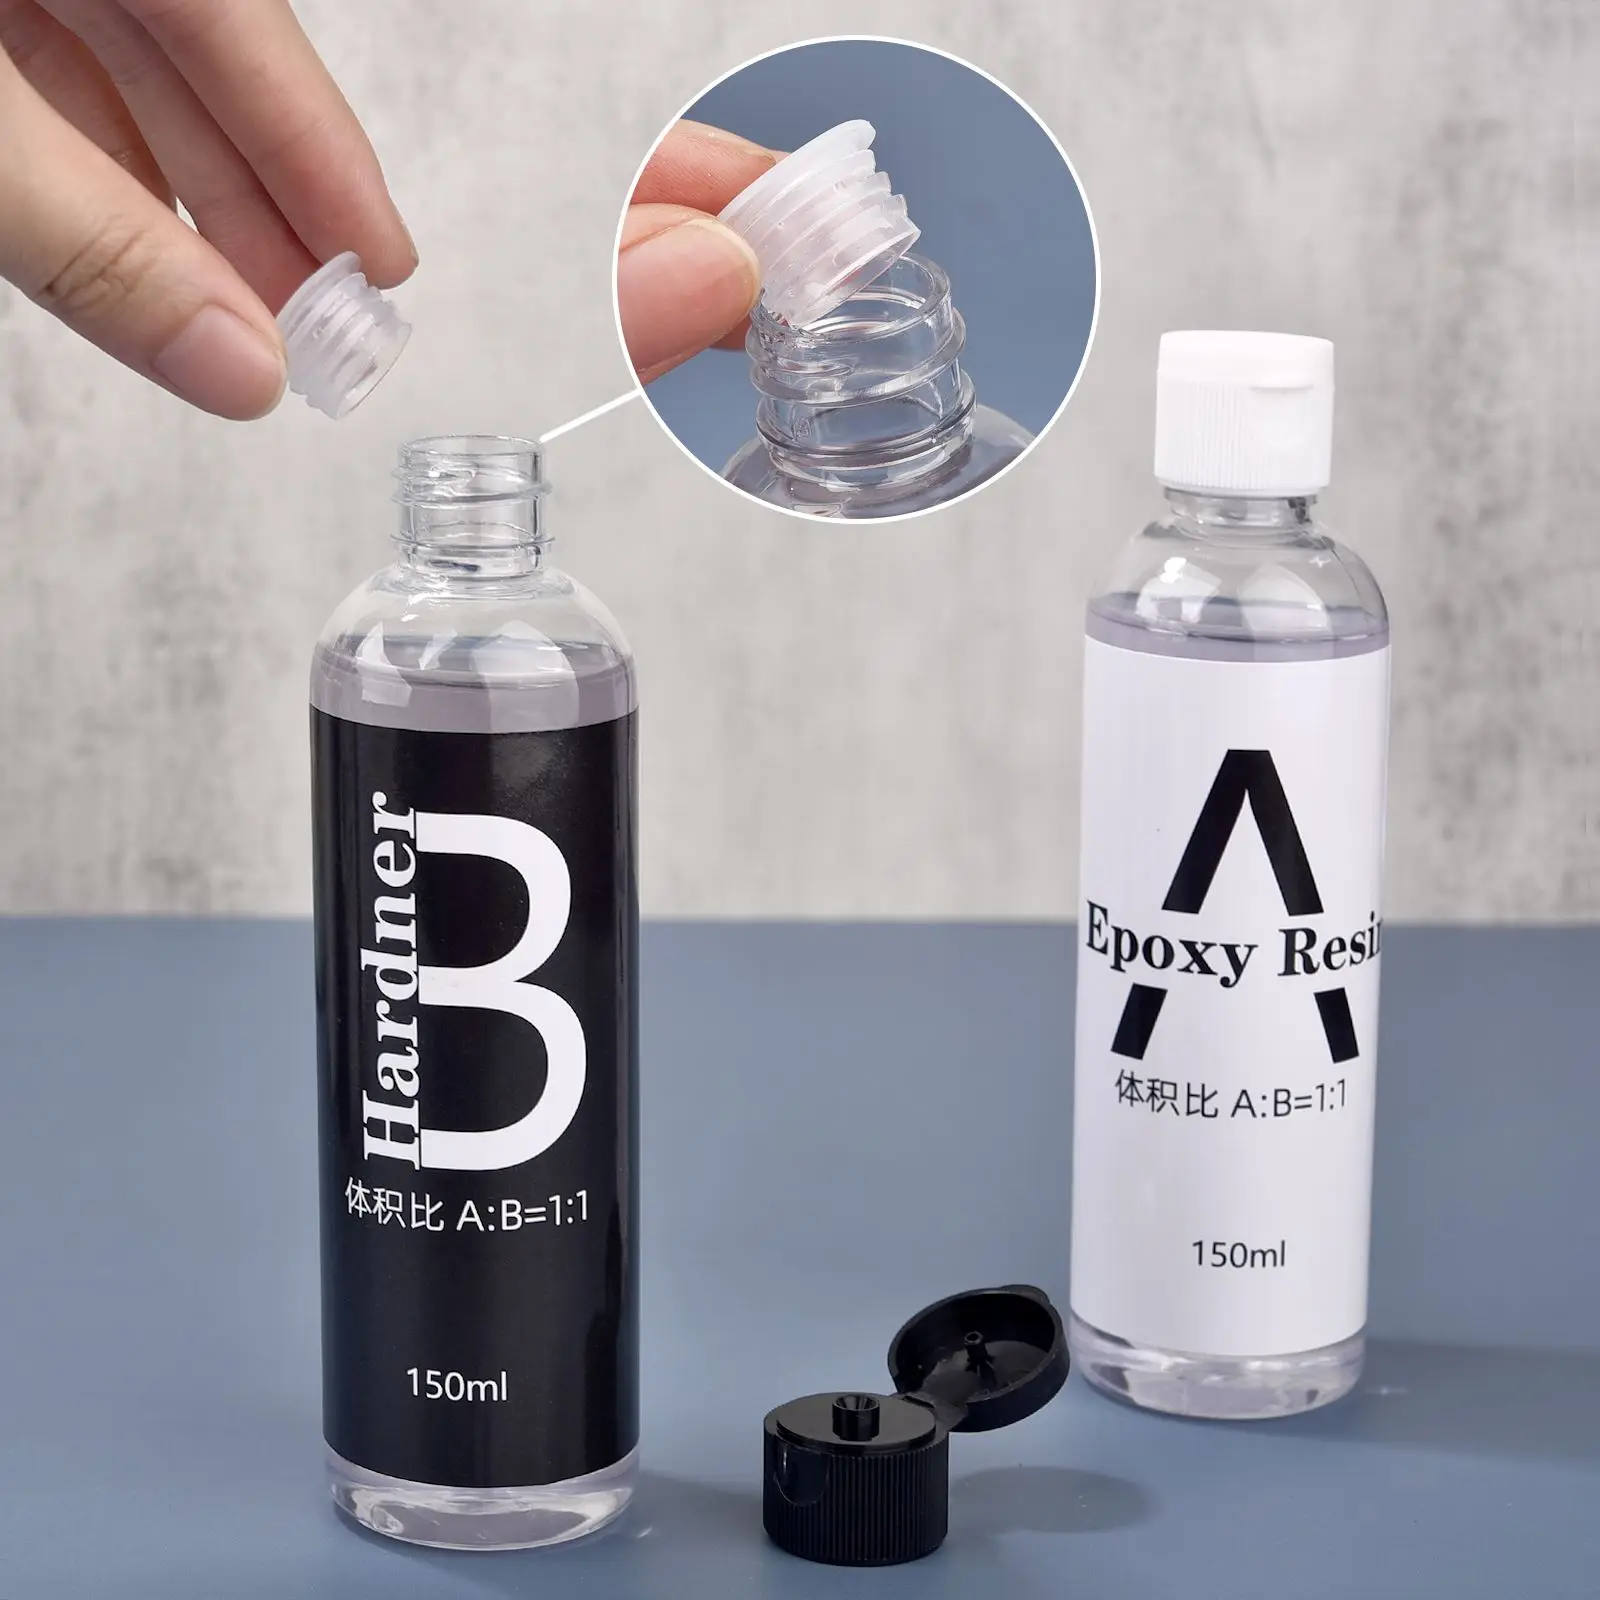 1:1 Crystal Clear Epoxy Resin Kit High Gloss & Bubbles Free Art Resin  Supplies for Coating and Casting Craft DIY Jewelry Making